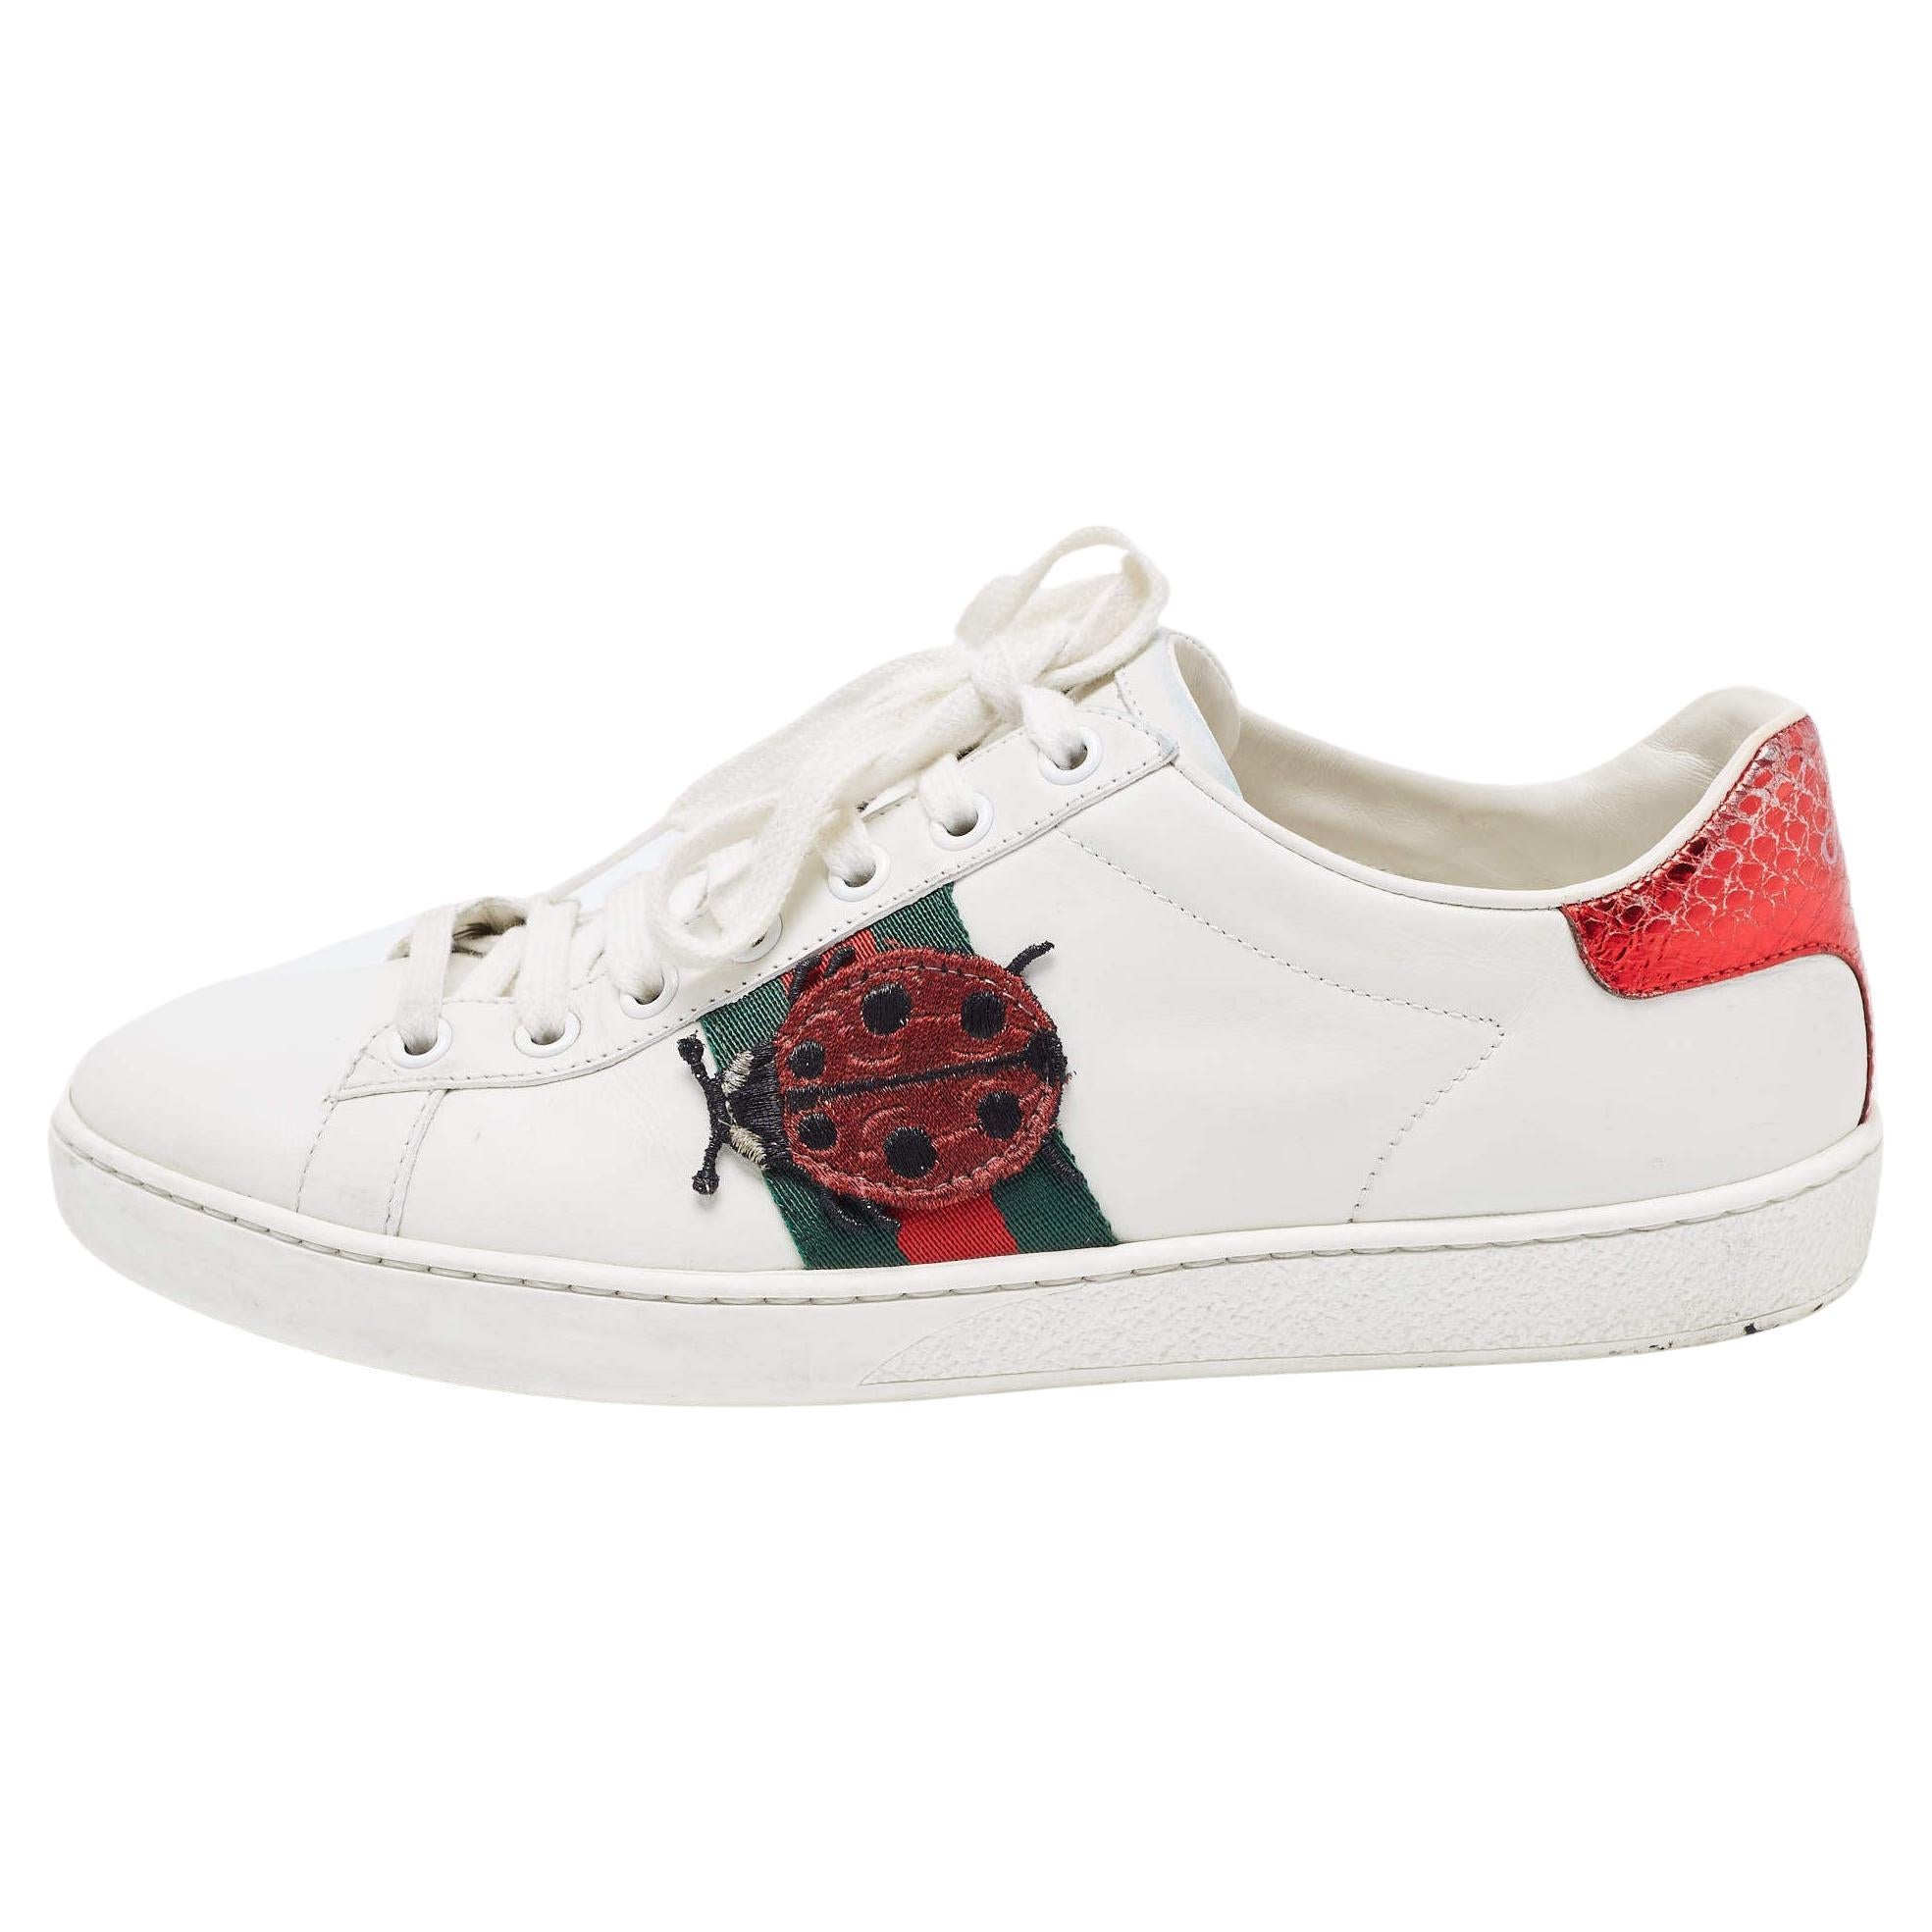 Gucci White/Red Leather and Snake Embossed Leather Ace Pineapple Sneakers Size 3